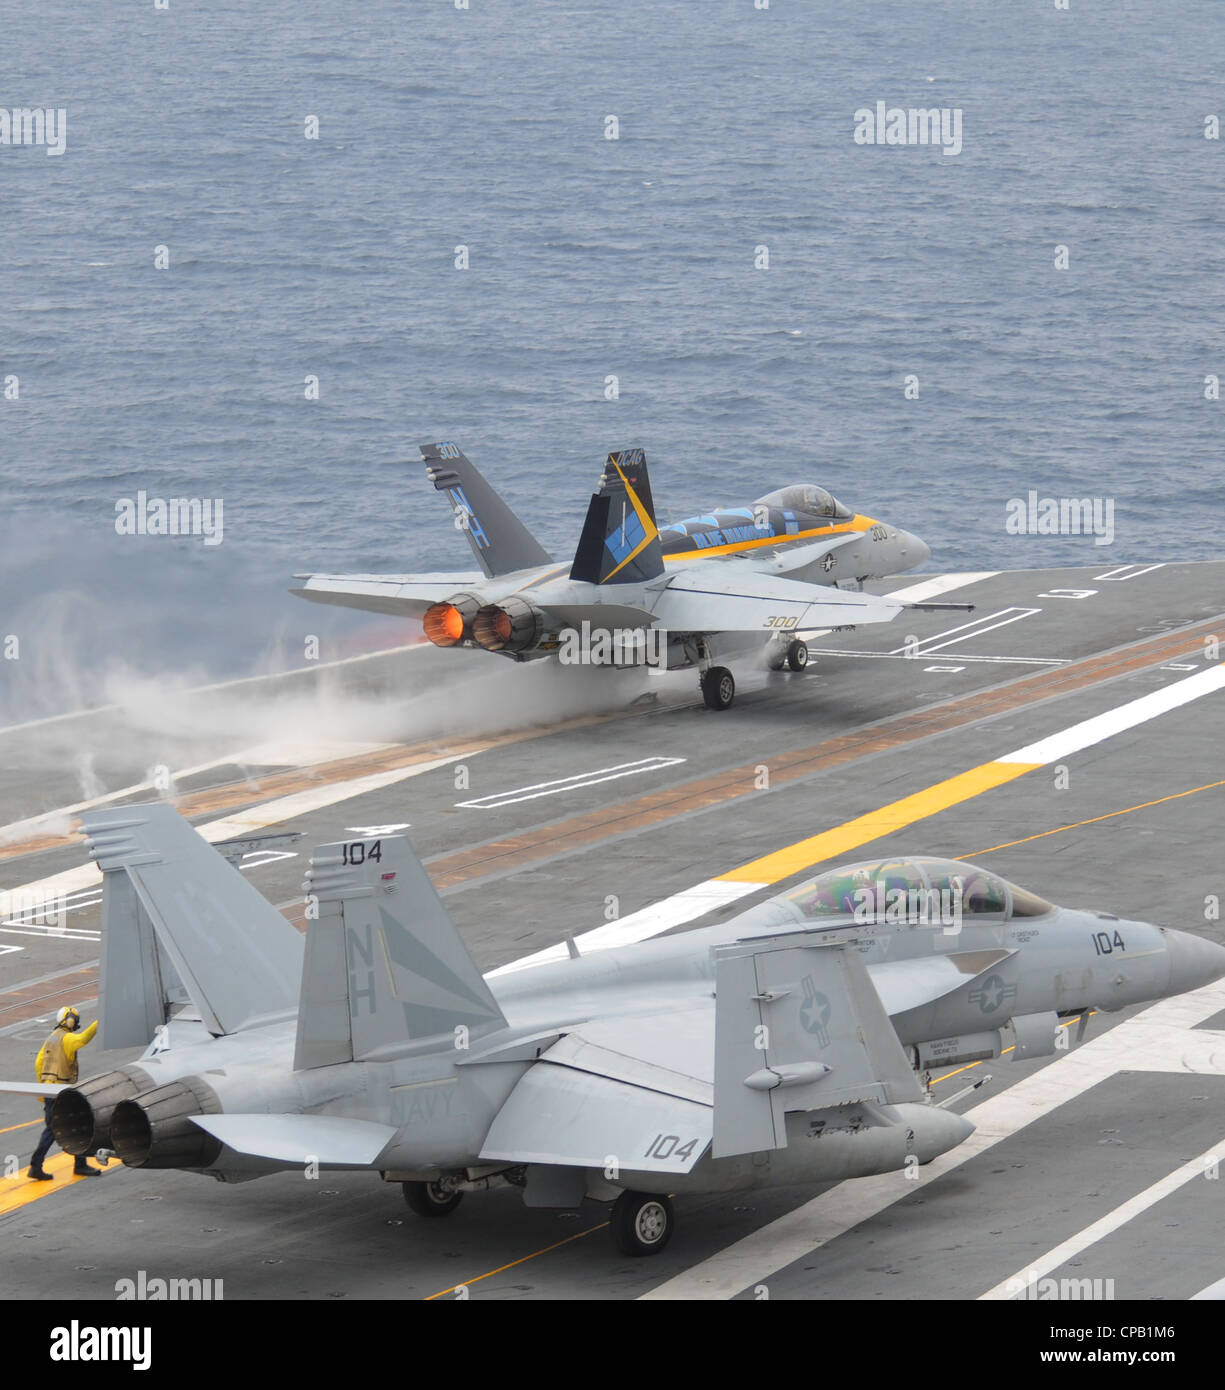 An F/A-18C Hornet assigned to the Blue Diamonds of Strike Fighter Squadron (VFA) 146 launches from the aircraft carrier USS Nimitz (CVN 68) as an F/A-18F Super Hornet assigned to the Black Knights of Strike Fighter Squadron (VFA) 154 taxies to catapult one in preparation for launch from the flight deck. Nimitz is conducting carrier qualifications off the coast of southern California. Stock Photo